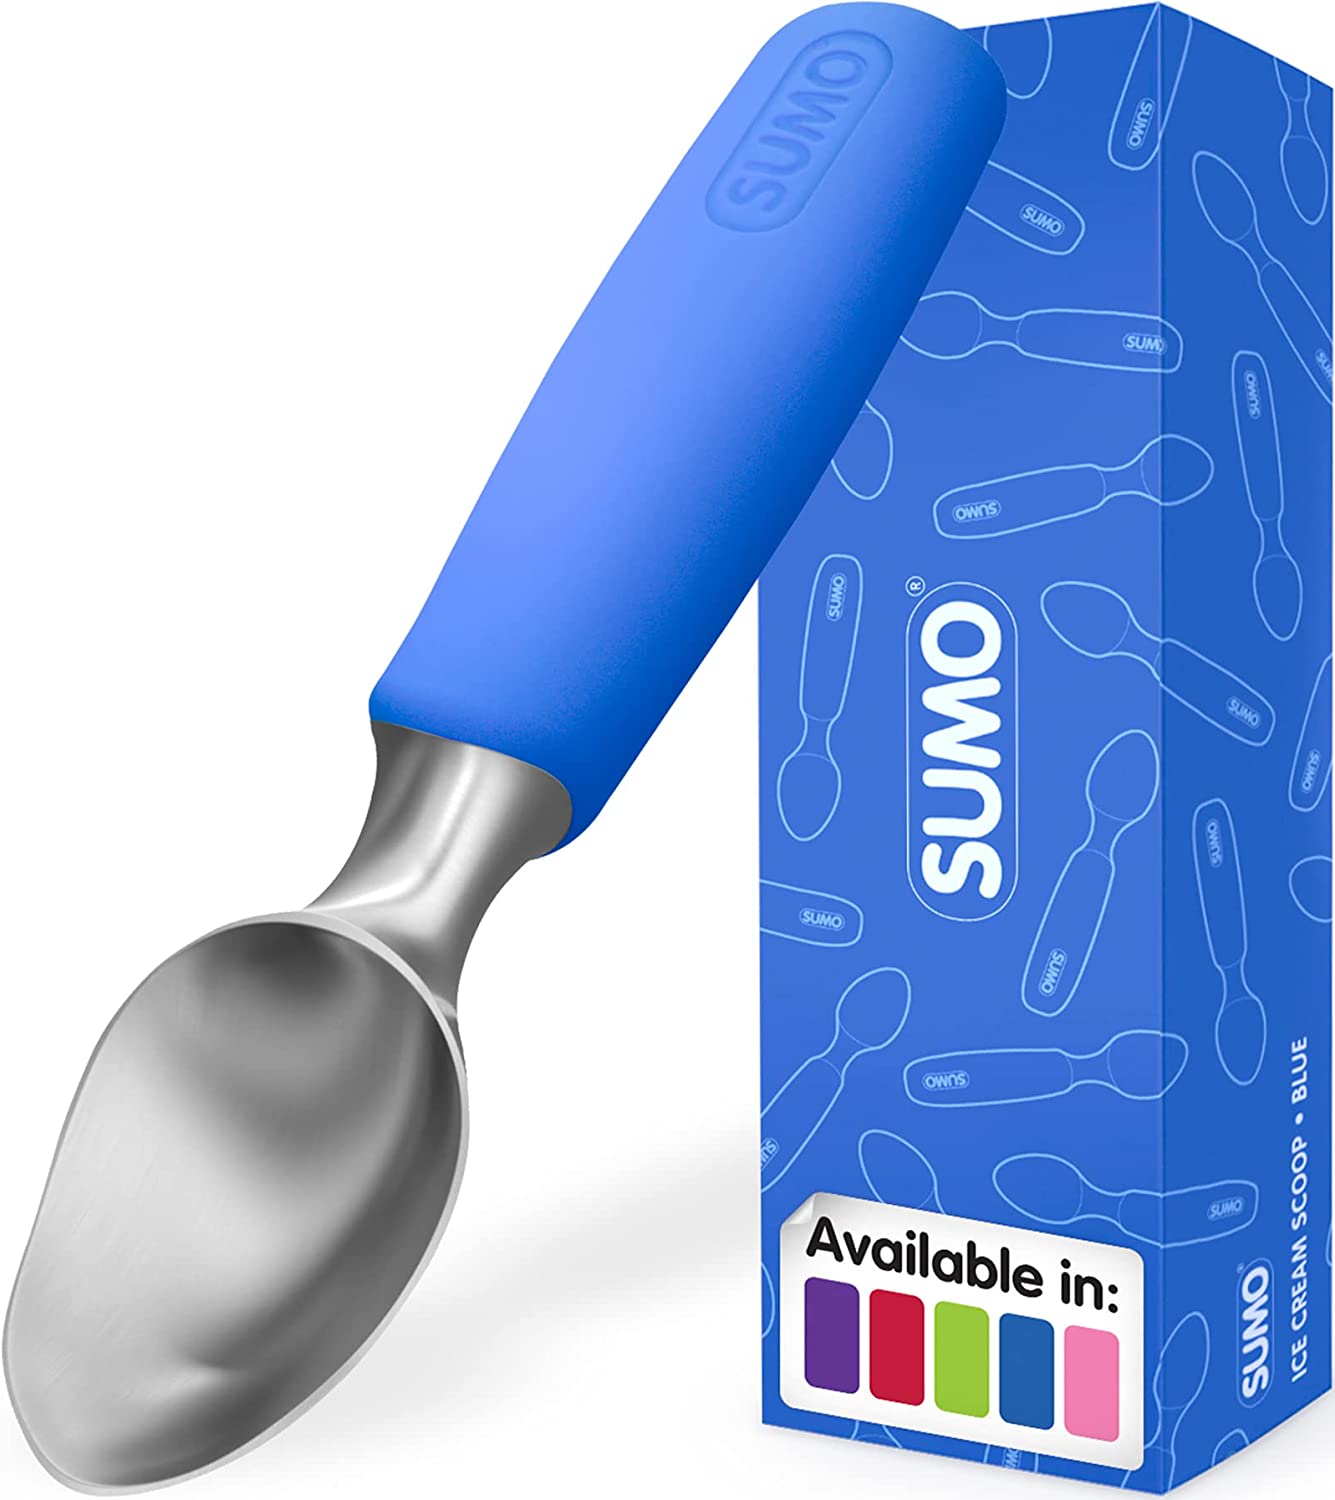 SUMO Ice Cream Scoop, Heavy Duty Stainless Steel Scooper, Comfortable Handle, Dishwasher Safe (Blue)